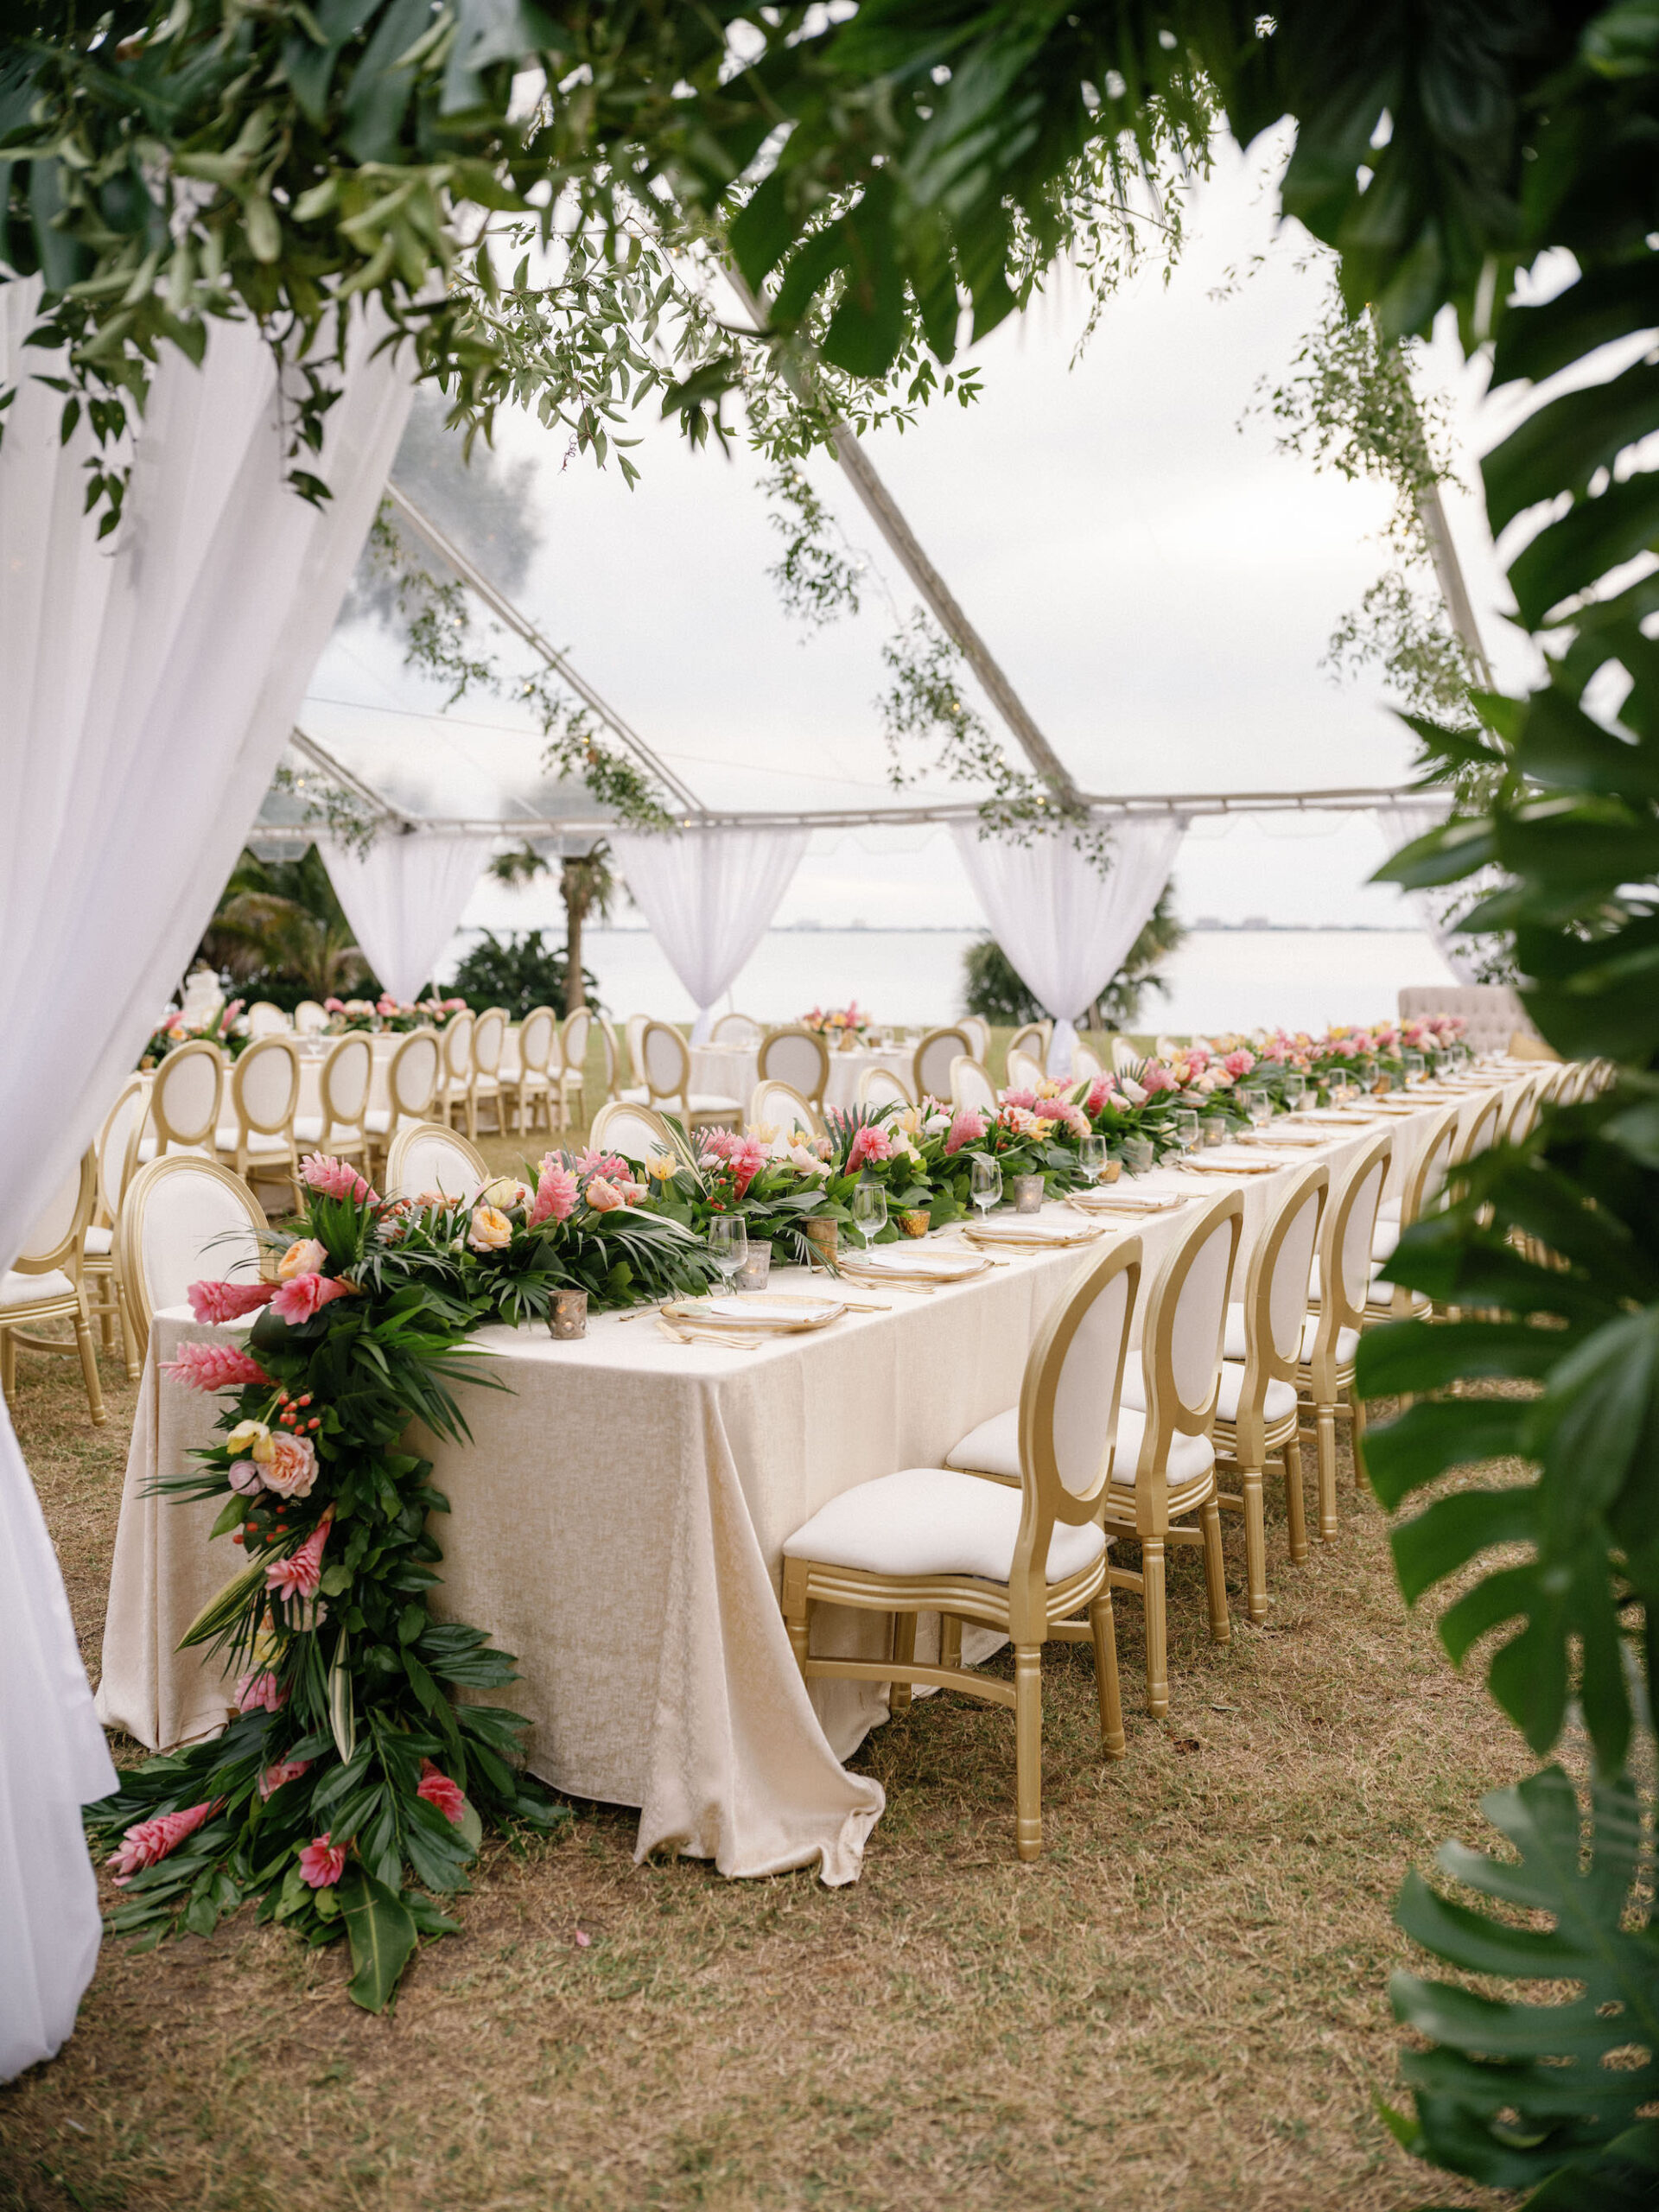 Luxurious Classic Wedding Tent Reception Decor with Lush Monstera Palm Leaves Arch, Long Feasting Table with Ivory Linens and Gold and Cream Dining Chairs, Monstera Palm Leaves with Pink Ginger Tropical Flowers and Peach Roses Garland | Tampa Bay Wedding Florist Botanica International Design Studio